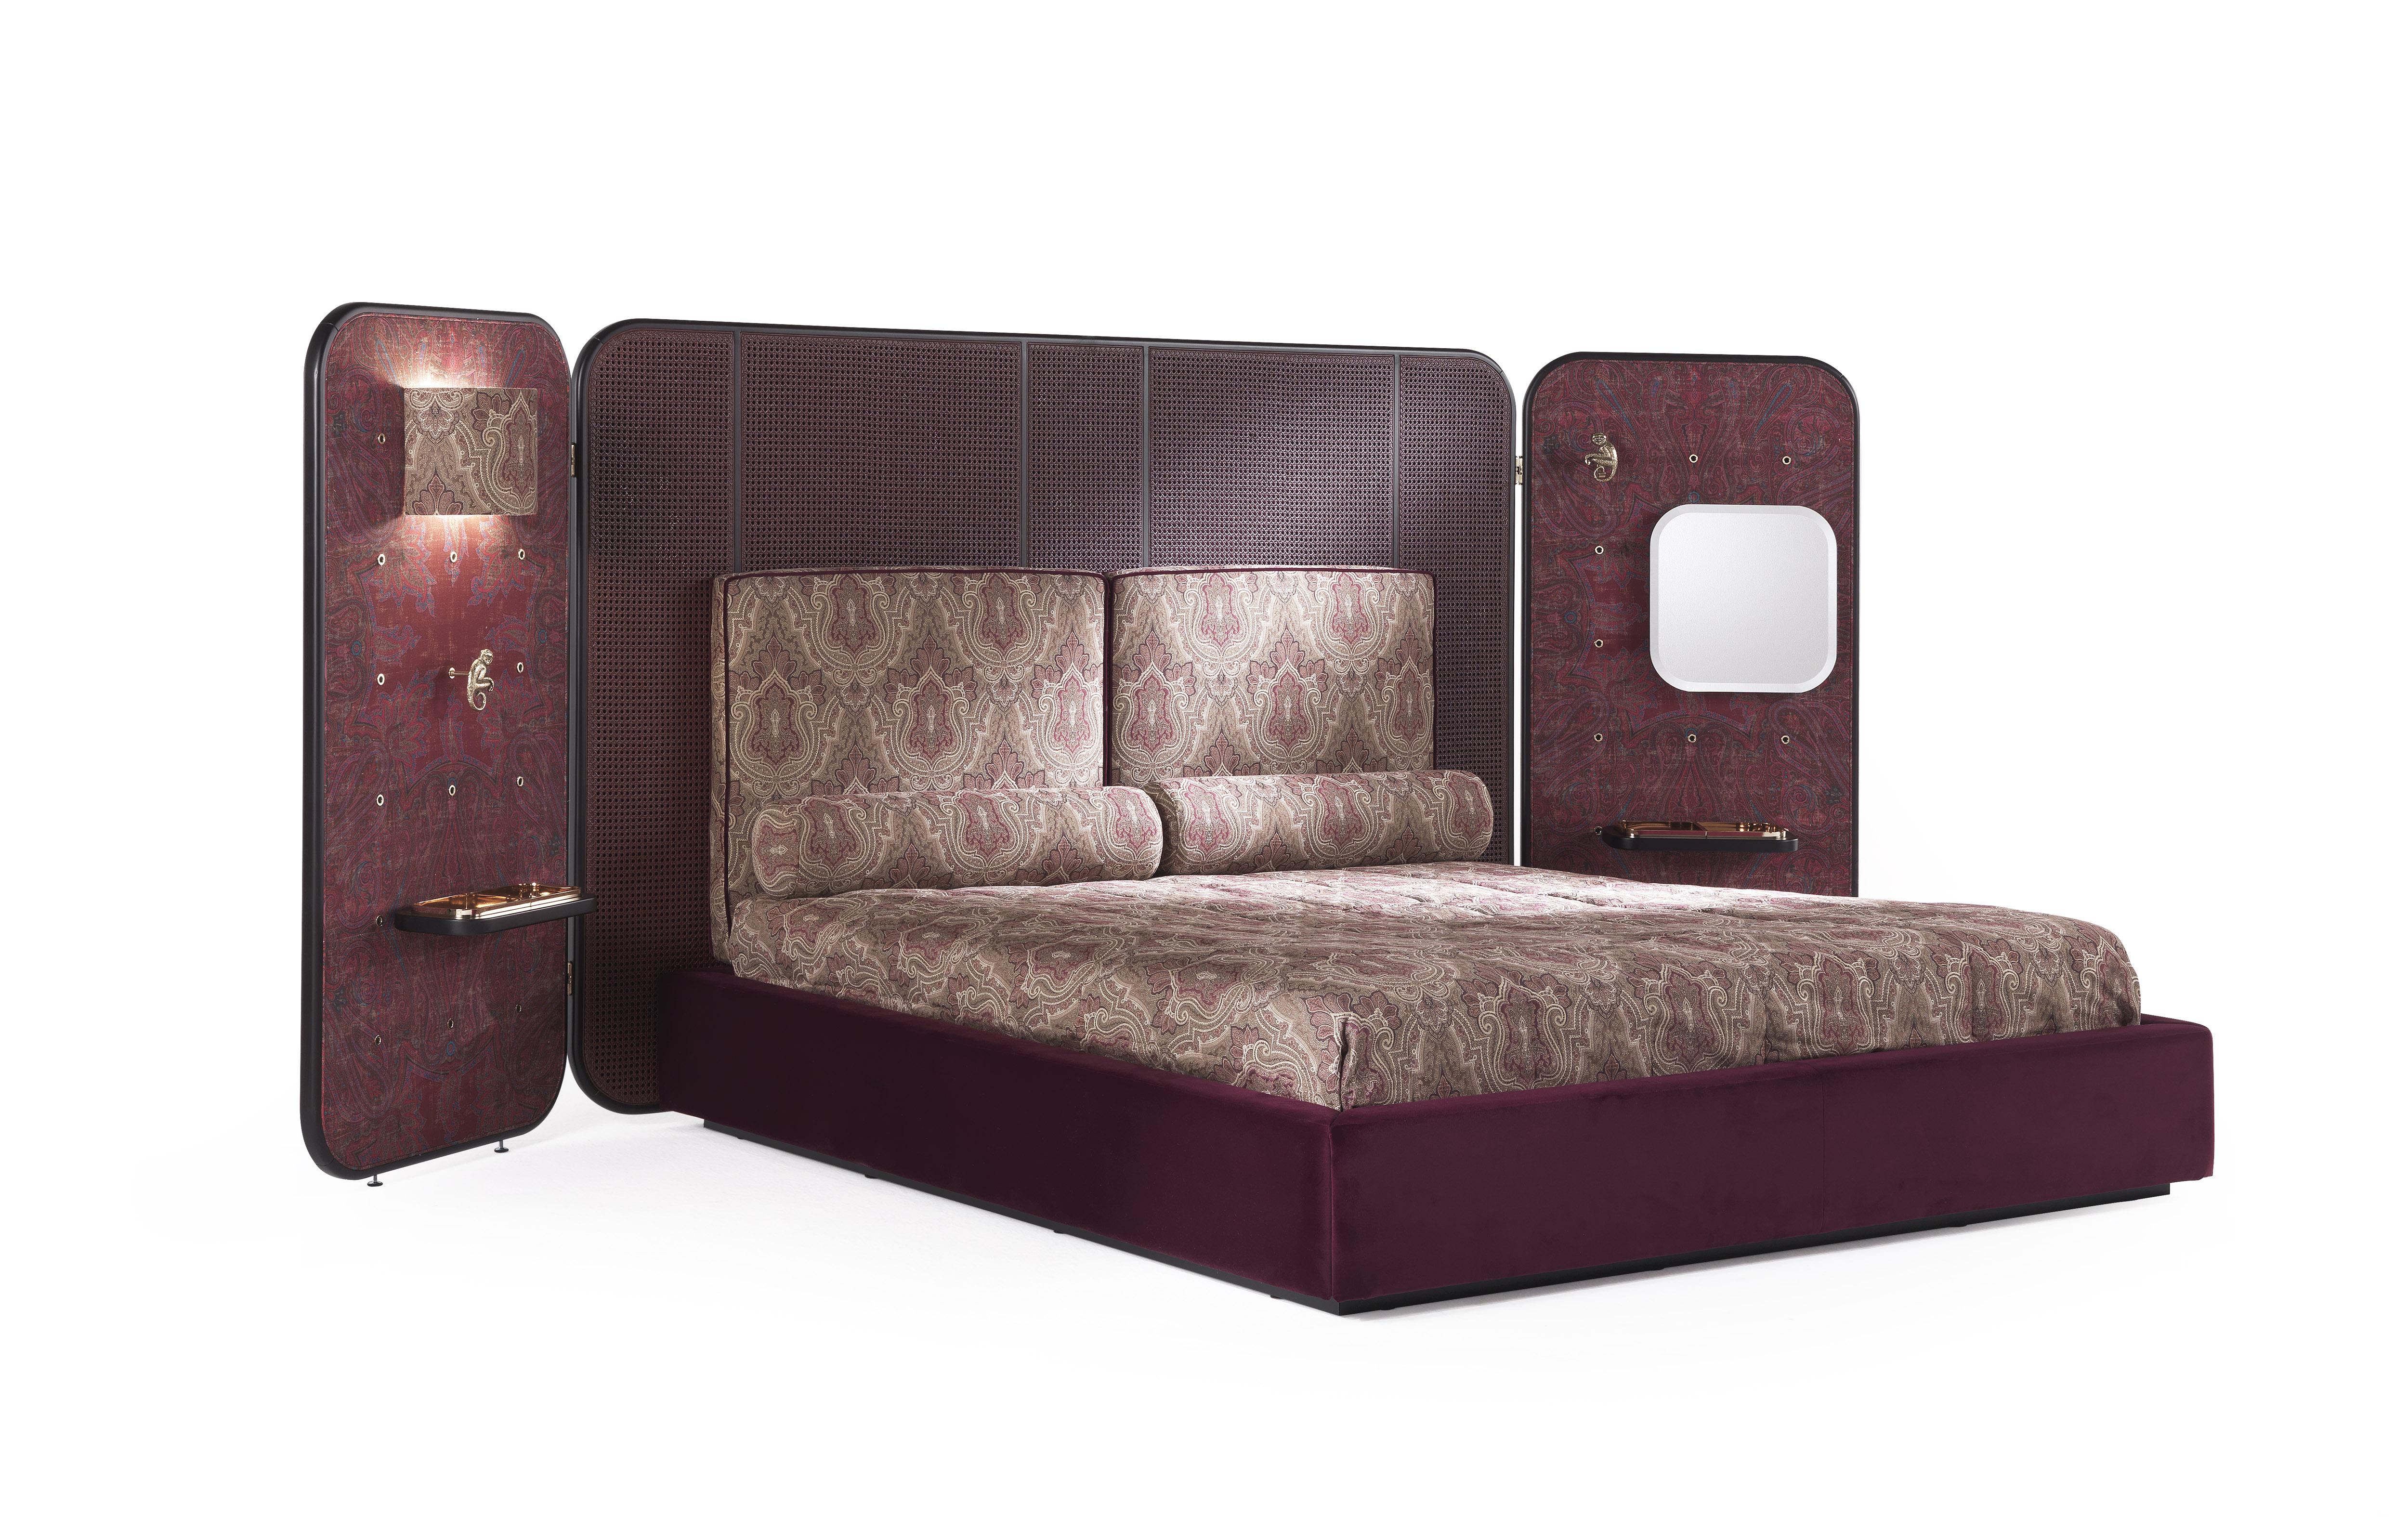 An imposing bed that epitomizes the powerful and eclectic style of Etro Home Interiors collection. The impressive headboard in dark wengé dyed wood and cherry red lacquered cane is completed with two lateral panels upholstered with the evocative